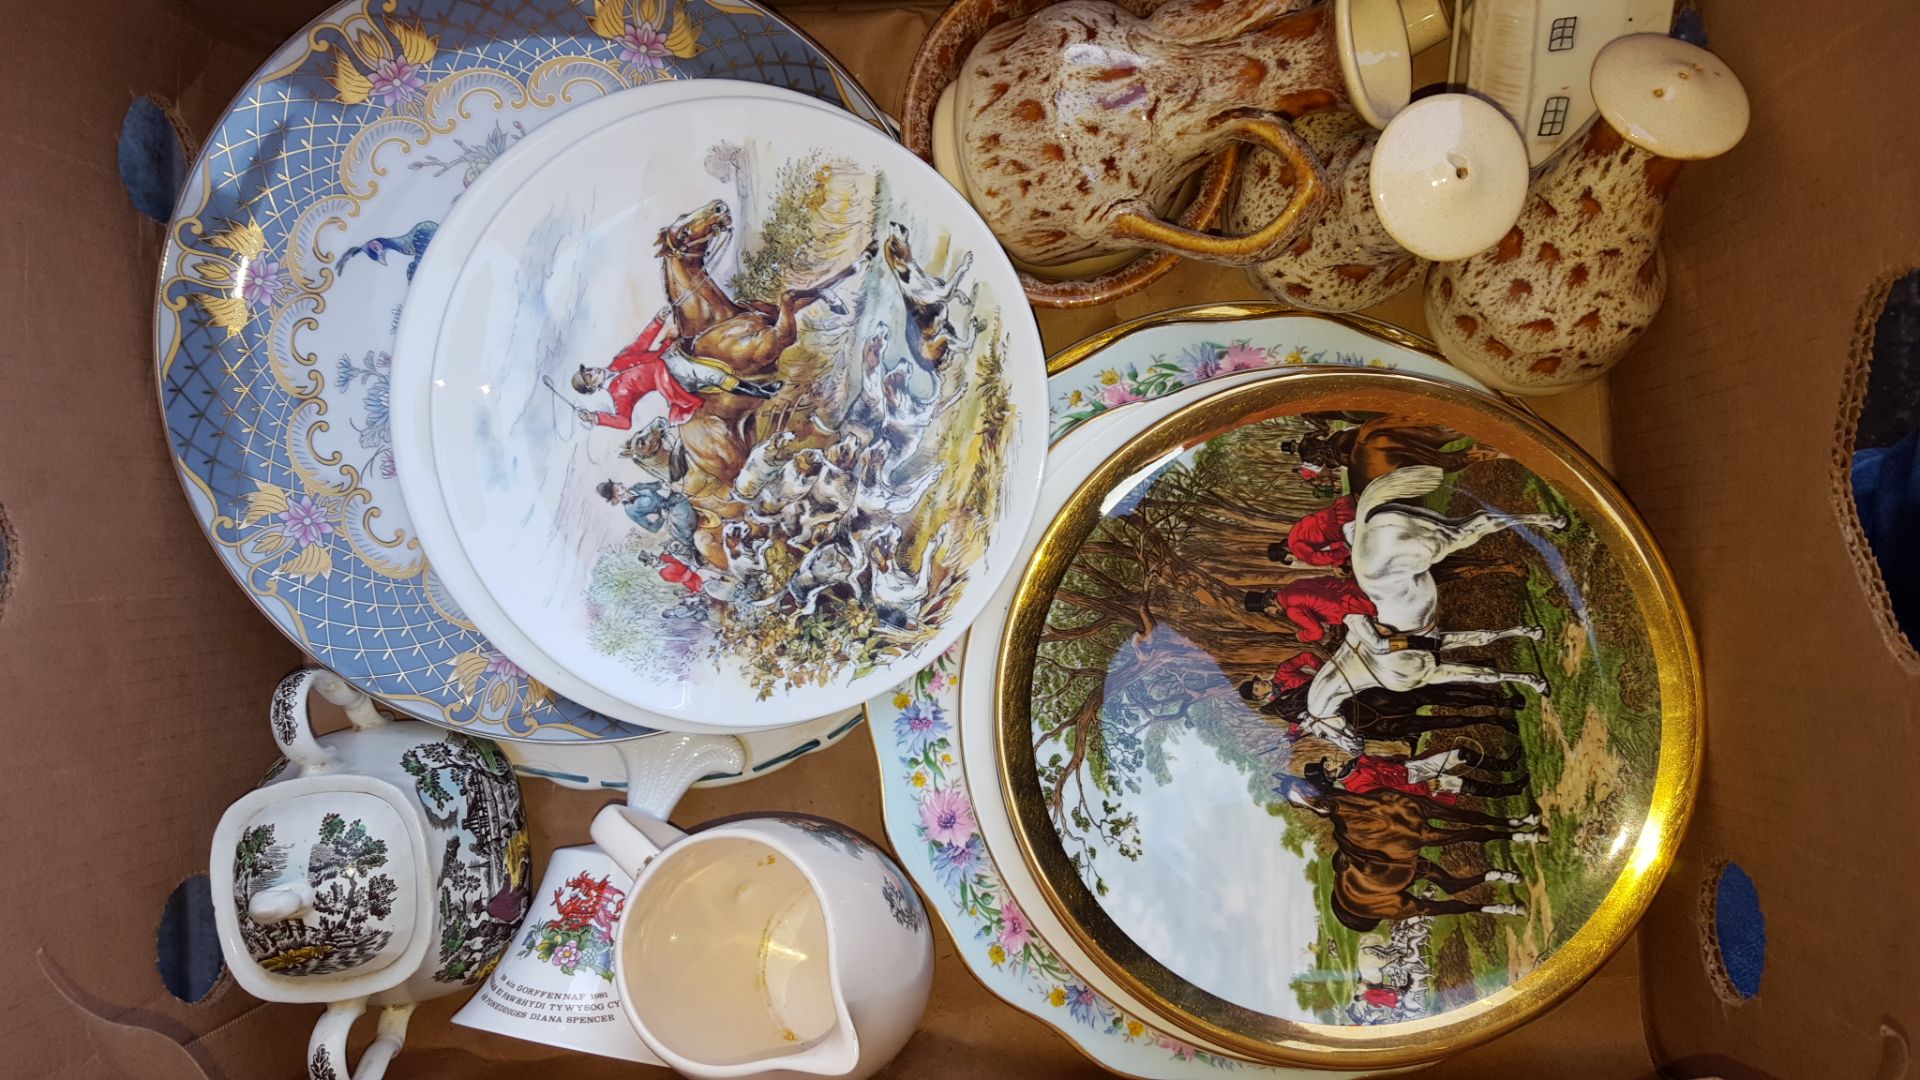 Box of Assorted Plates with Hunting or Game Scenes